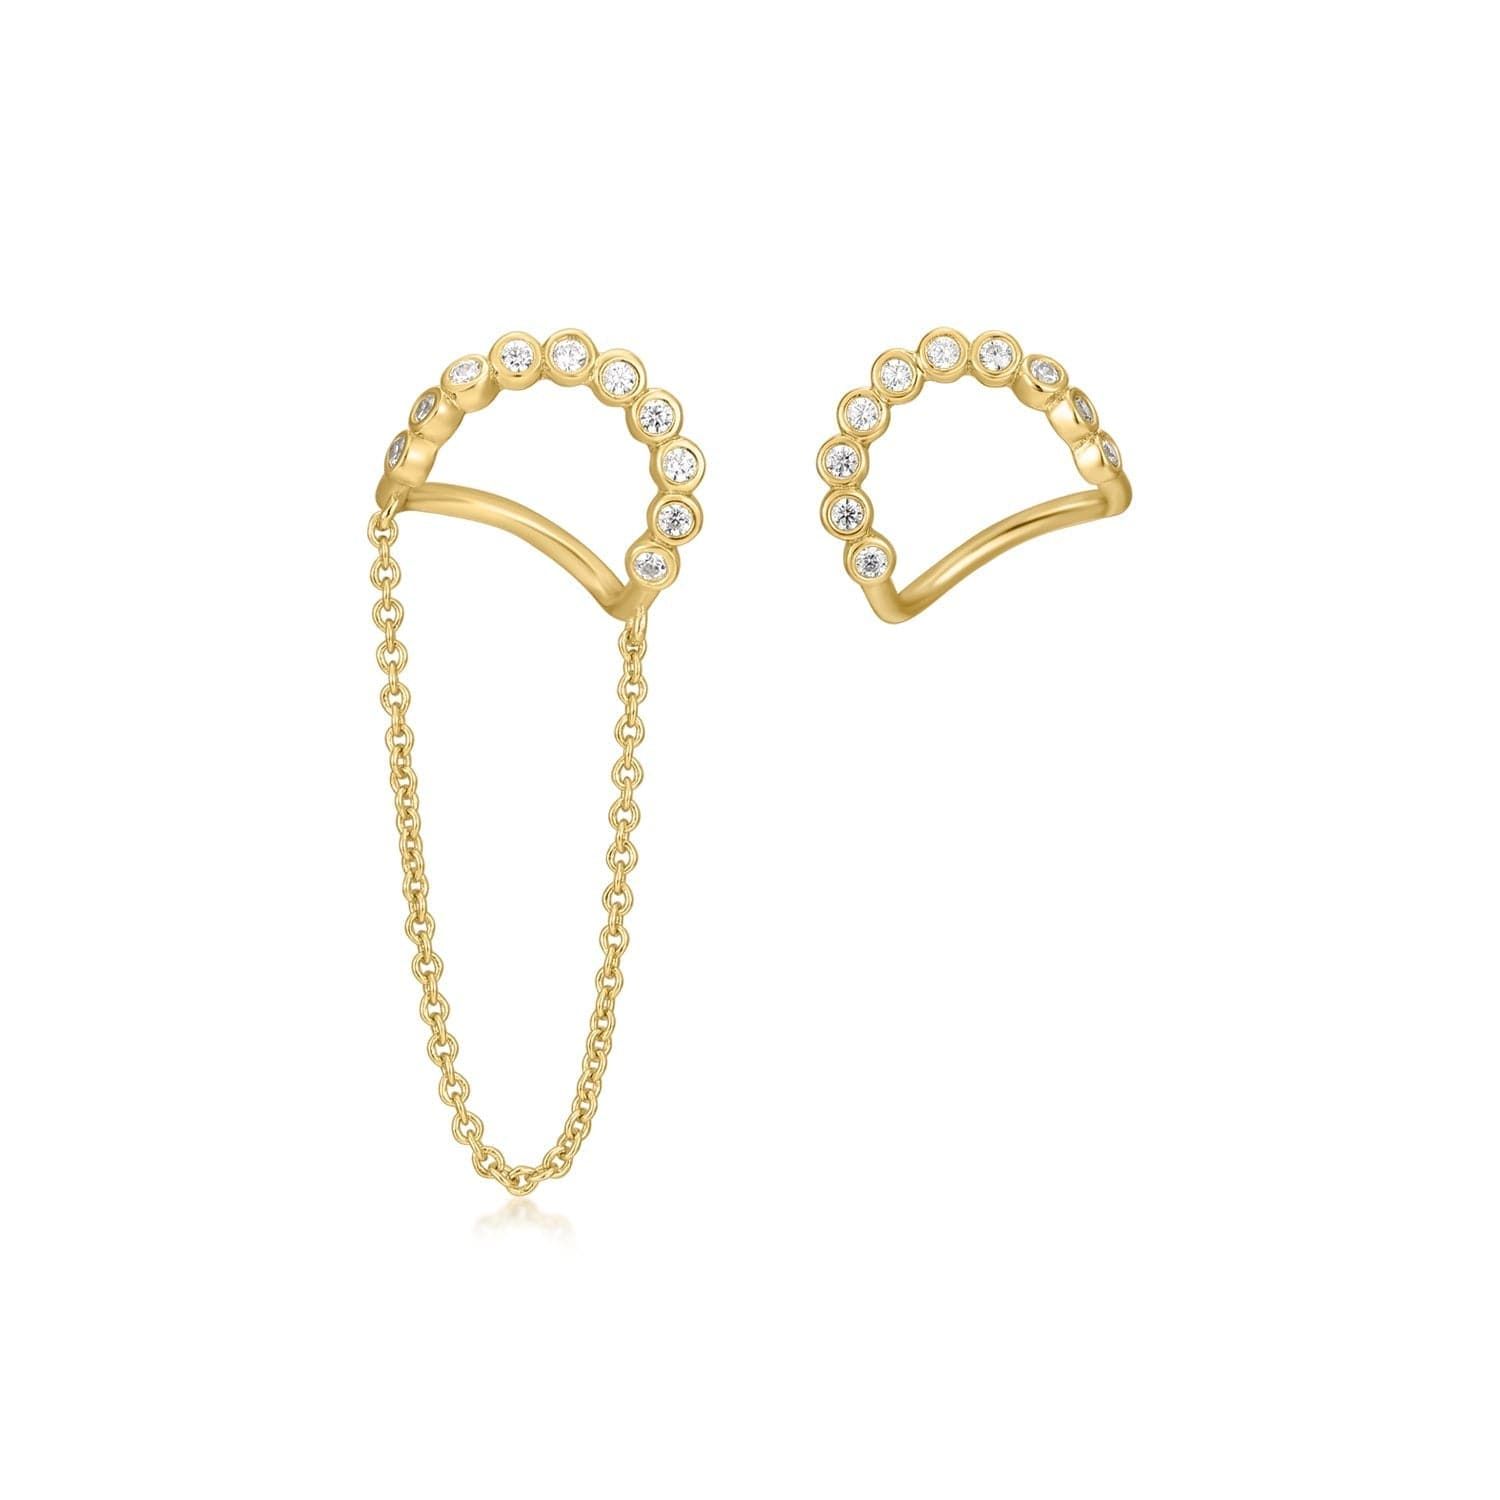 a pair of gold earrings with pearls